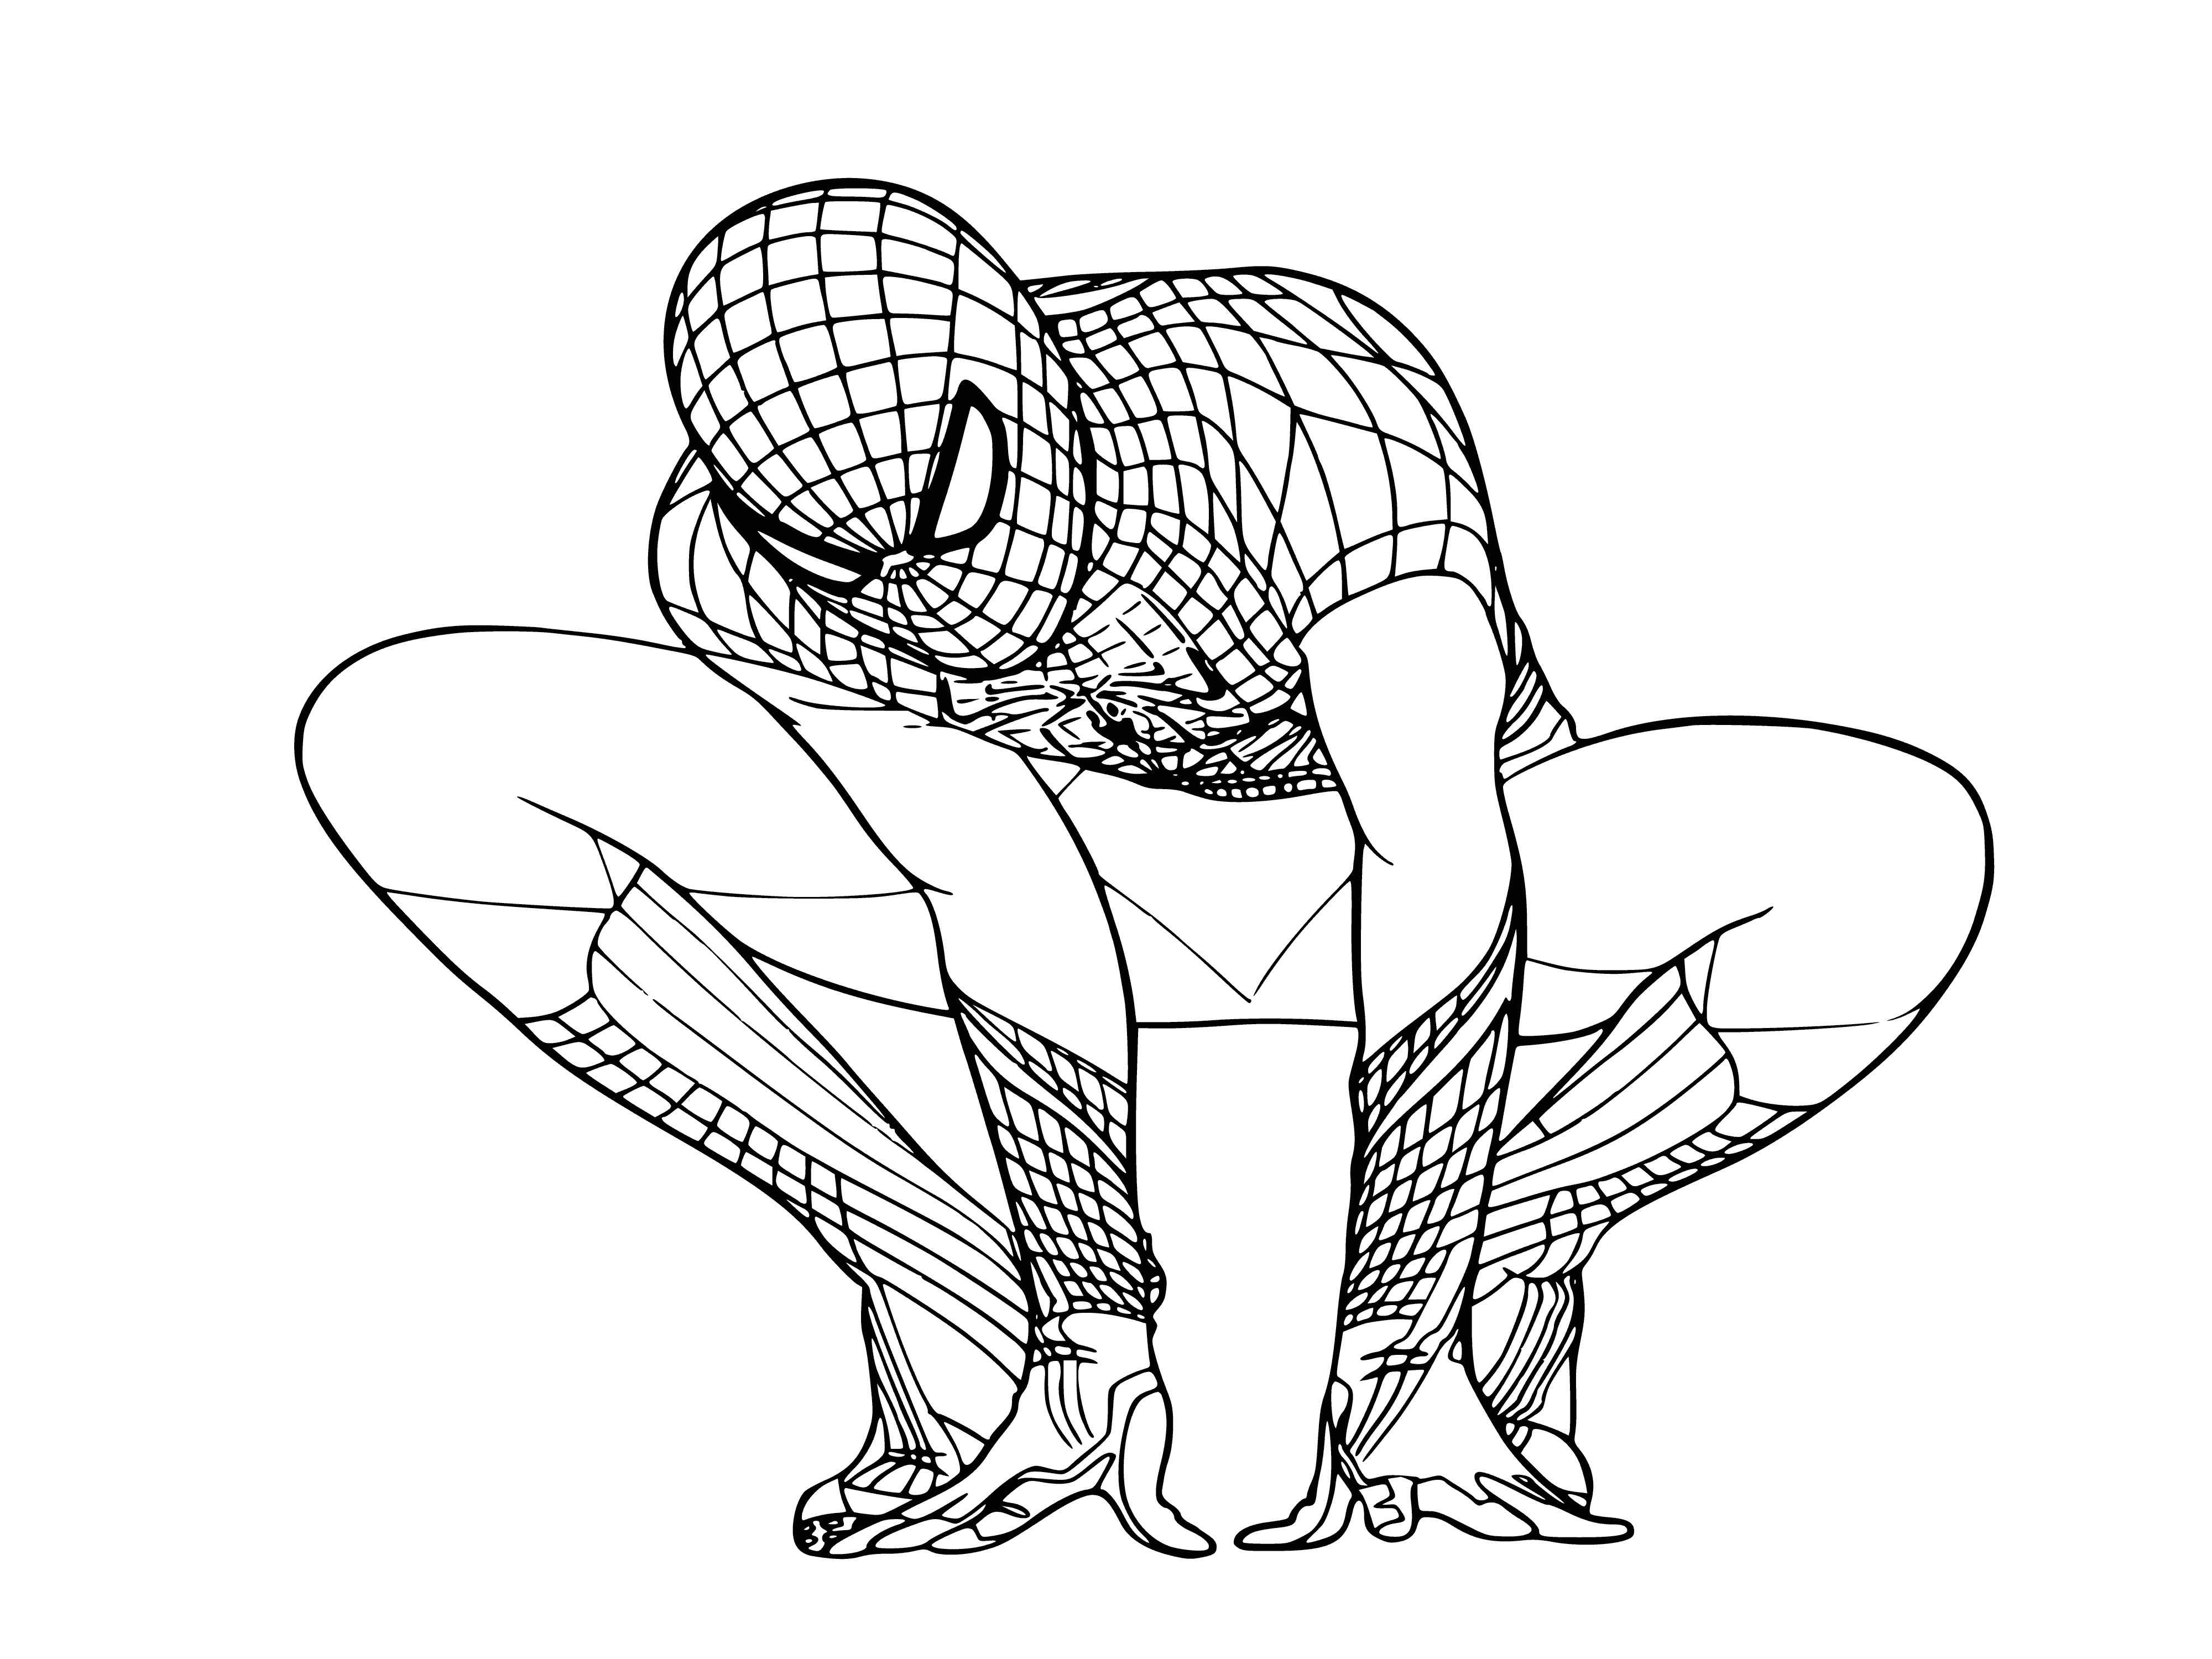 coloring page: Spiderman is a hero who protects the innocent, swings through the city on his web, and is ready to help those in need.